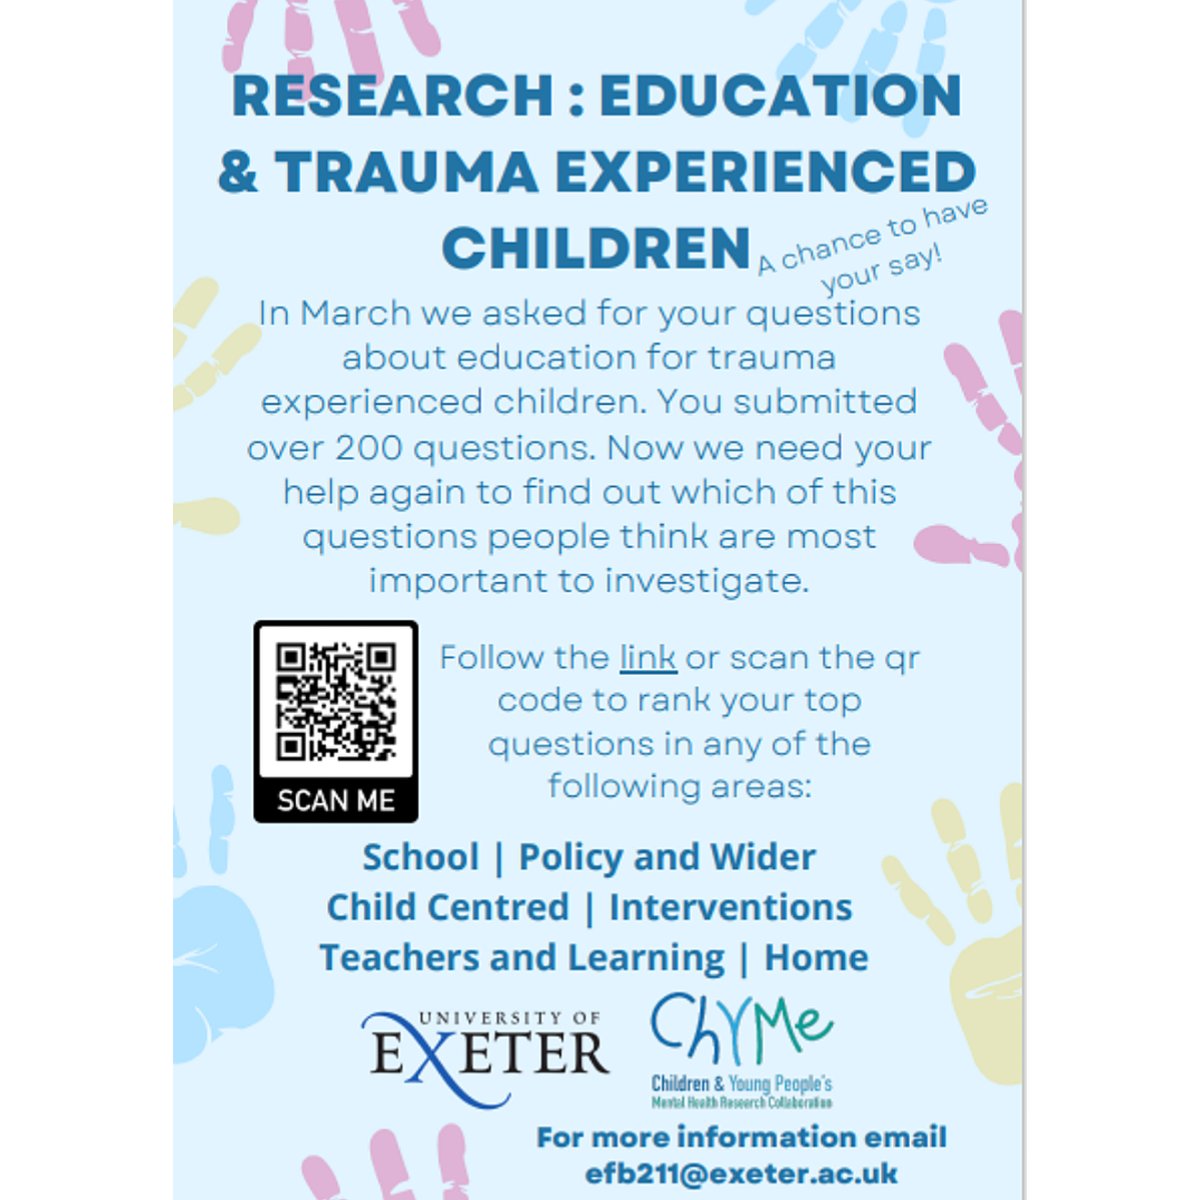 Let us know what you think the priorities should be in education for trauma-experienced children. Click the link below or scan the QR code to take part: exeter.onlinesurveys.ac.uk/education-rp